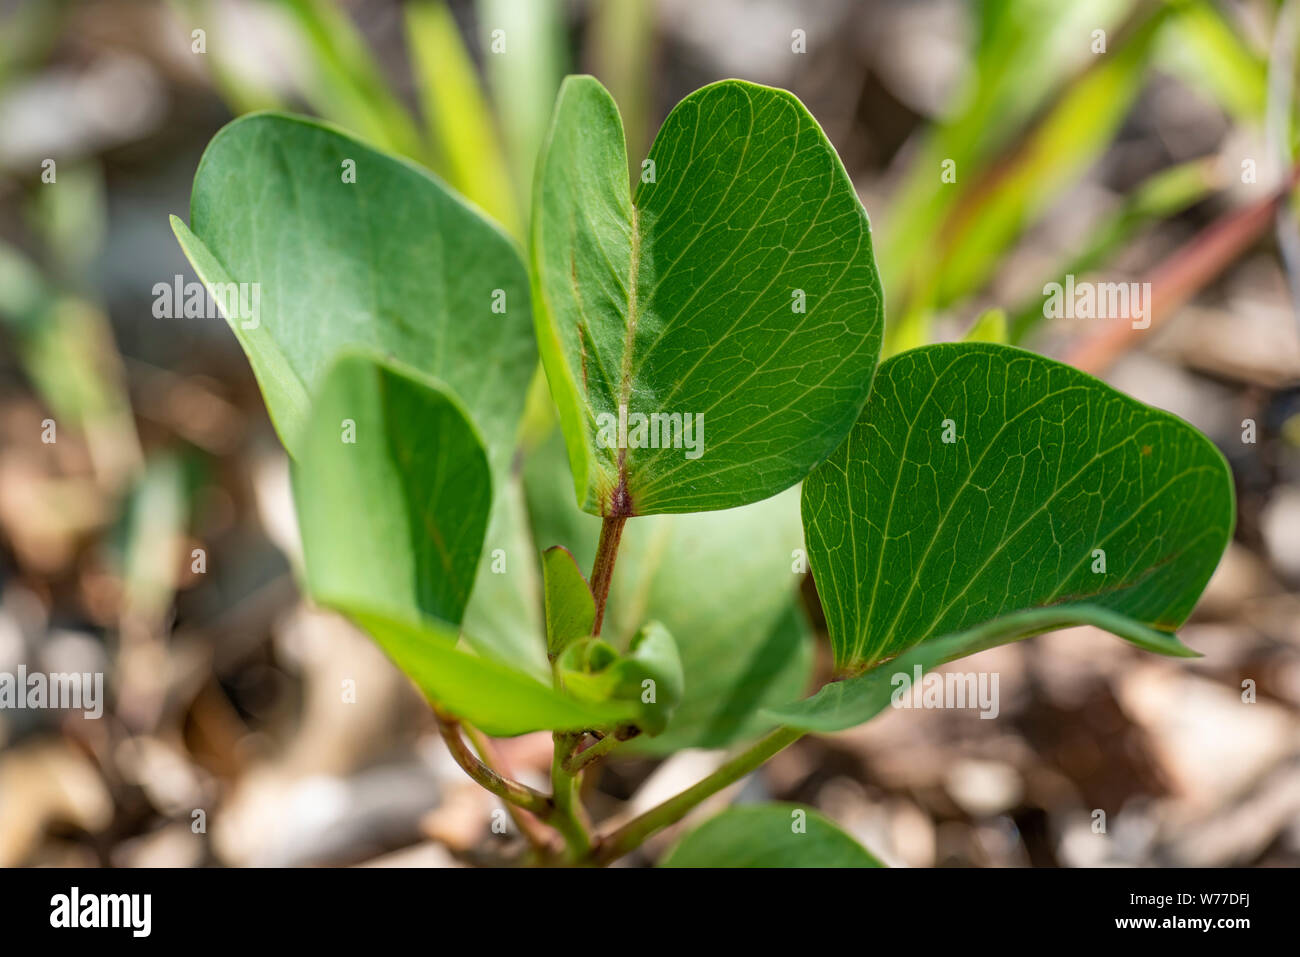 Ipomoea, green leaves, close-up in natural light. Koh Chang Island, Thailand. Stock Photo